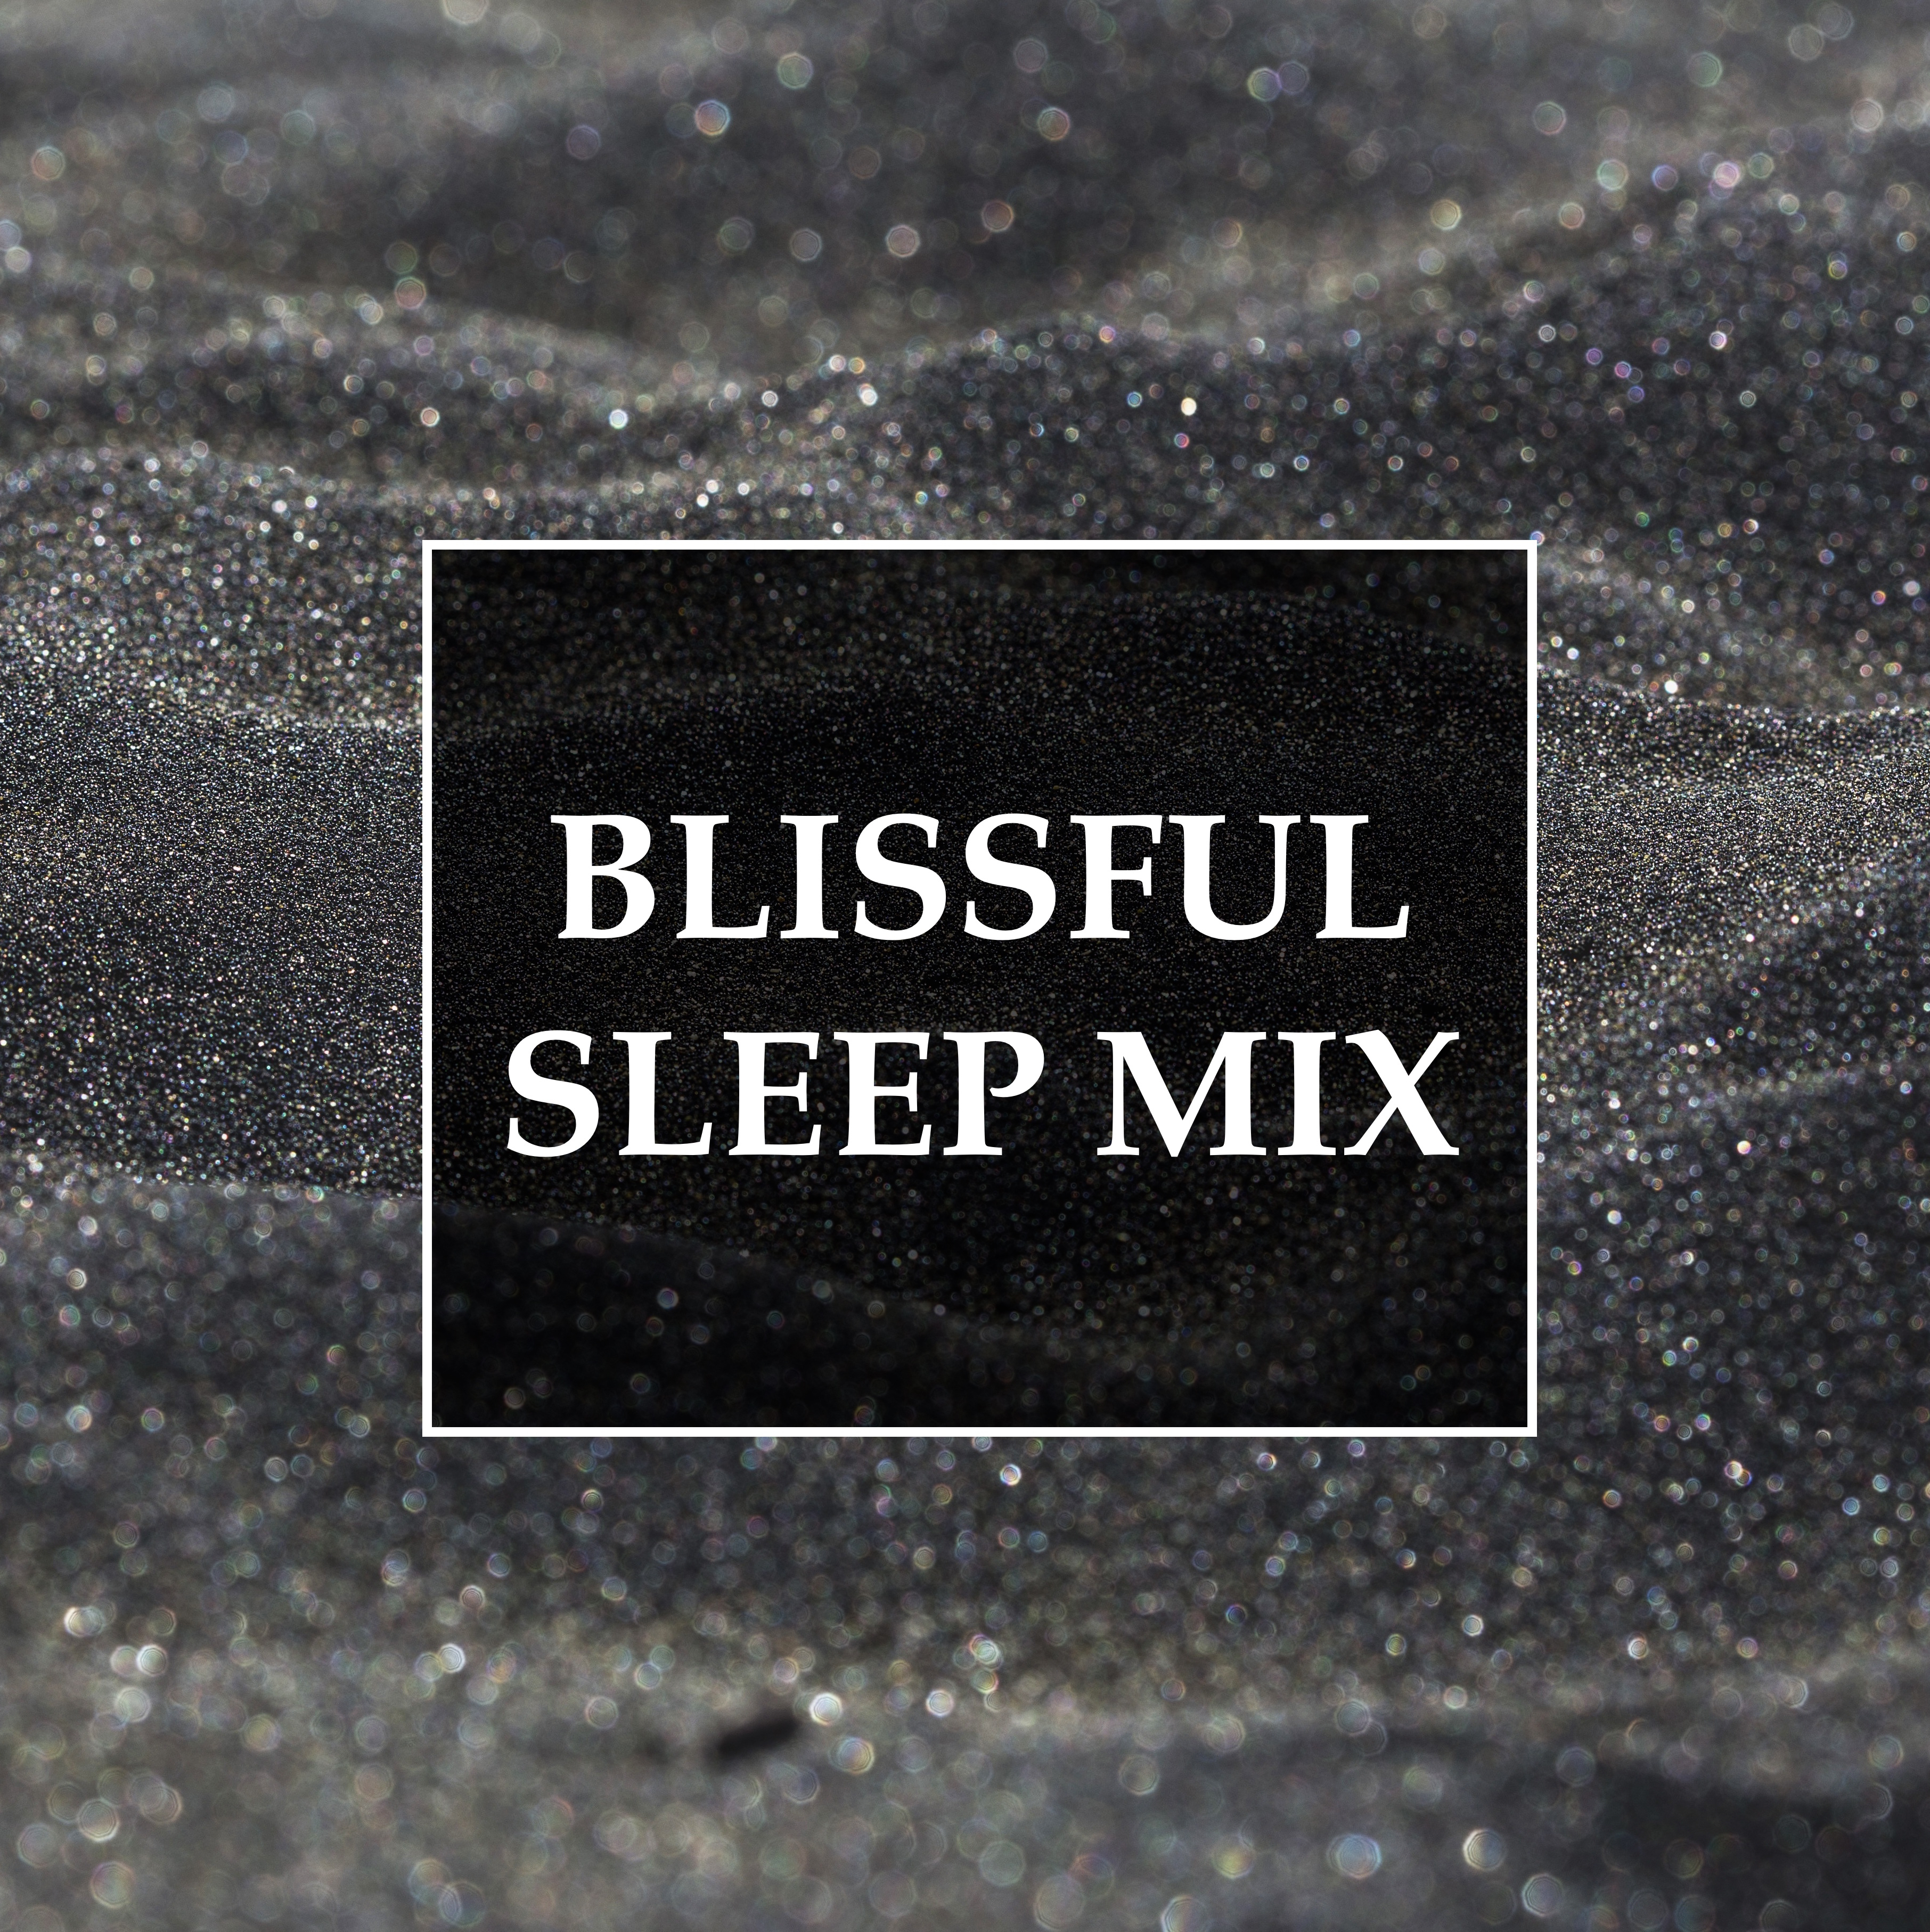 Blissful Sleep Mix - Complete Relaxation for Deep Sleep, Stress Relief, Yoga Sessions and Meditation, and for Better Mental Health and Well-Being